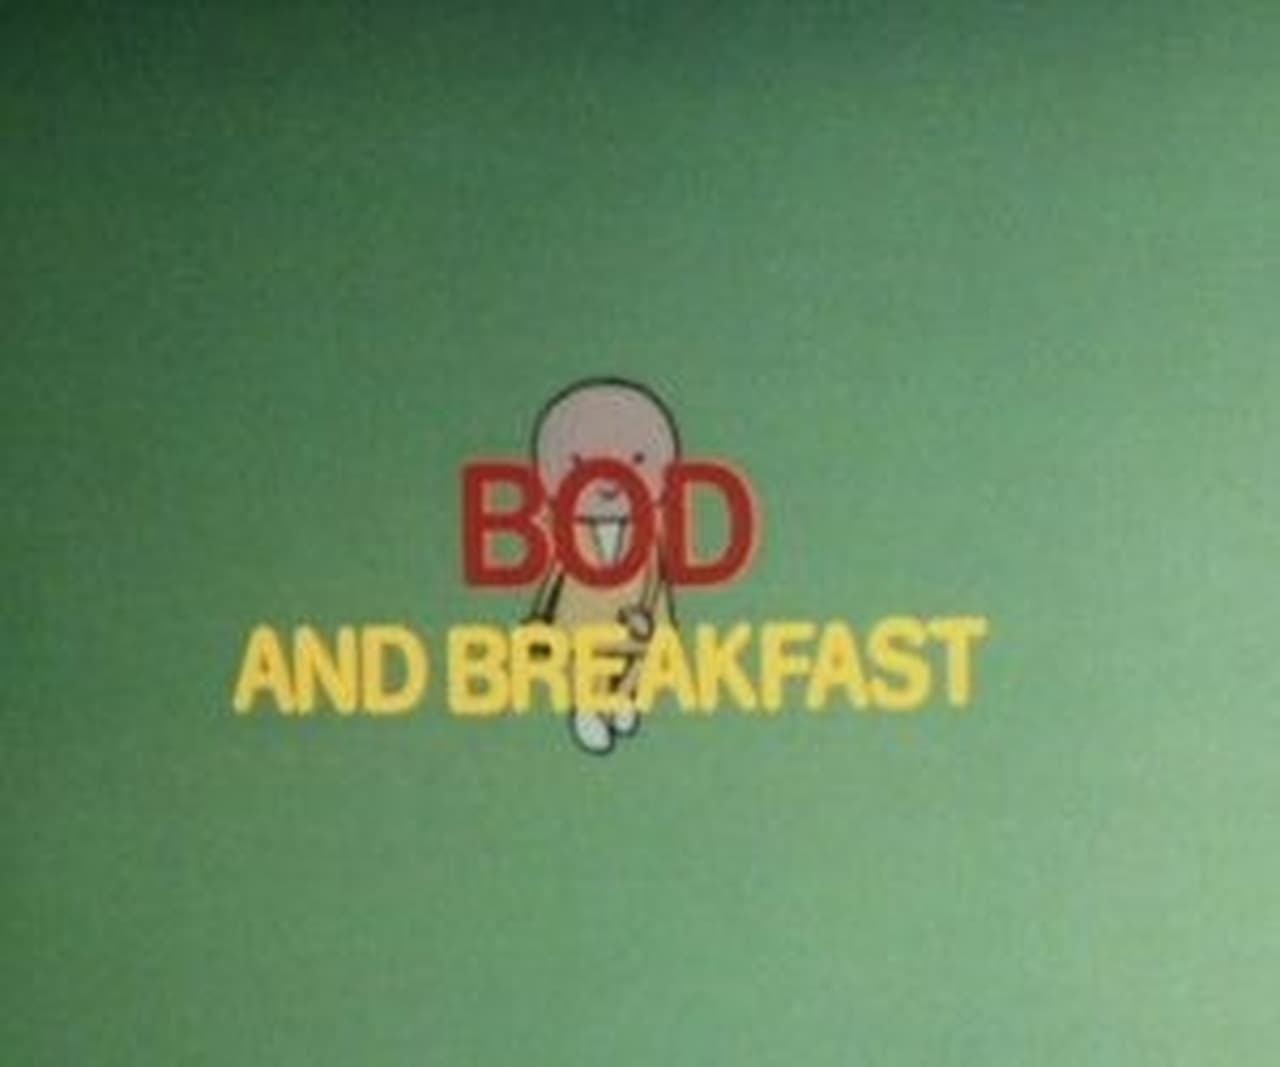 Bod and Breakfast